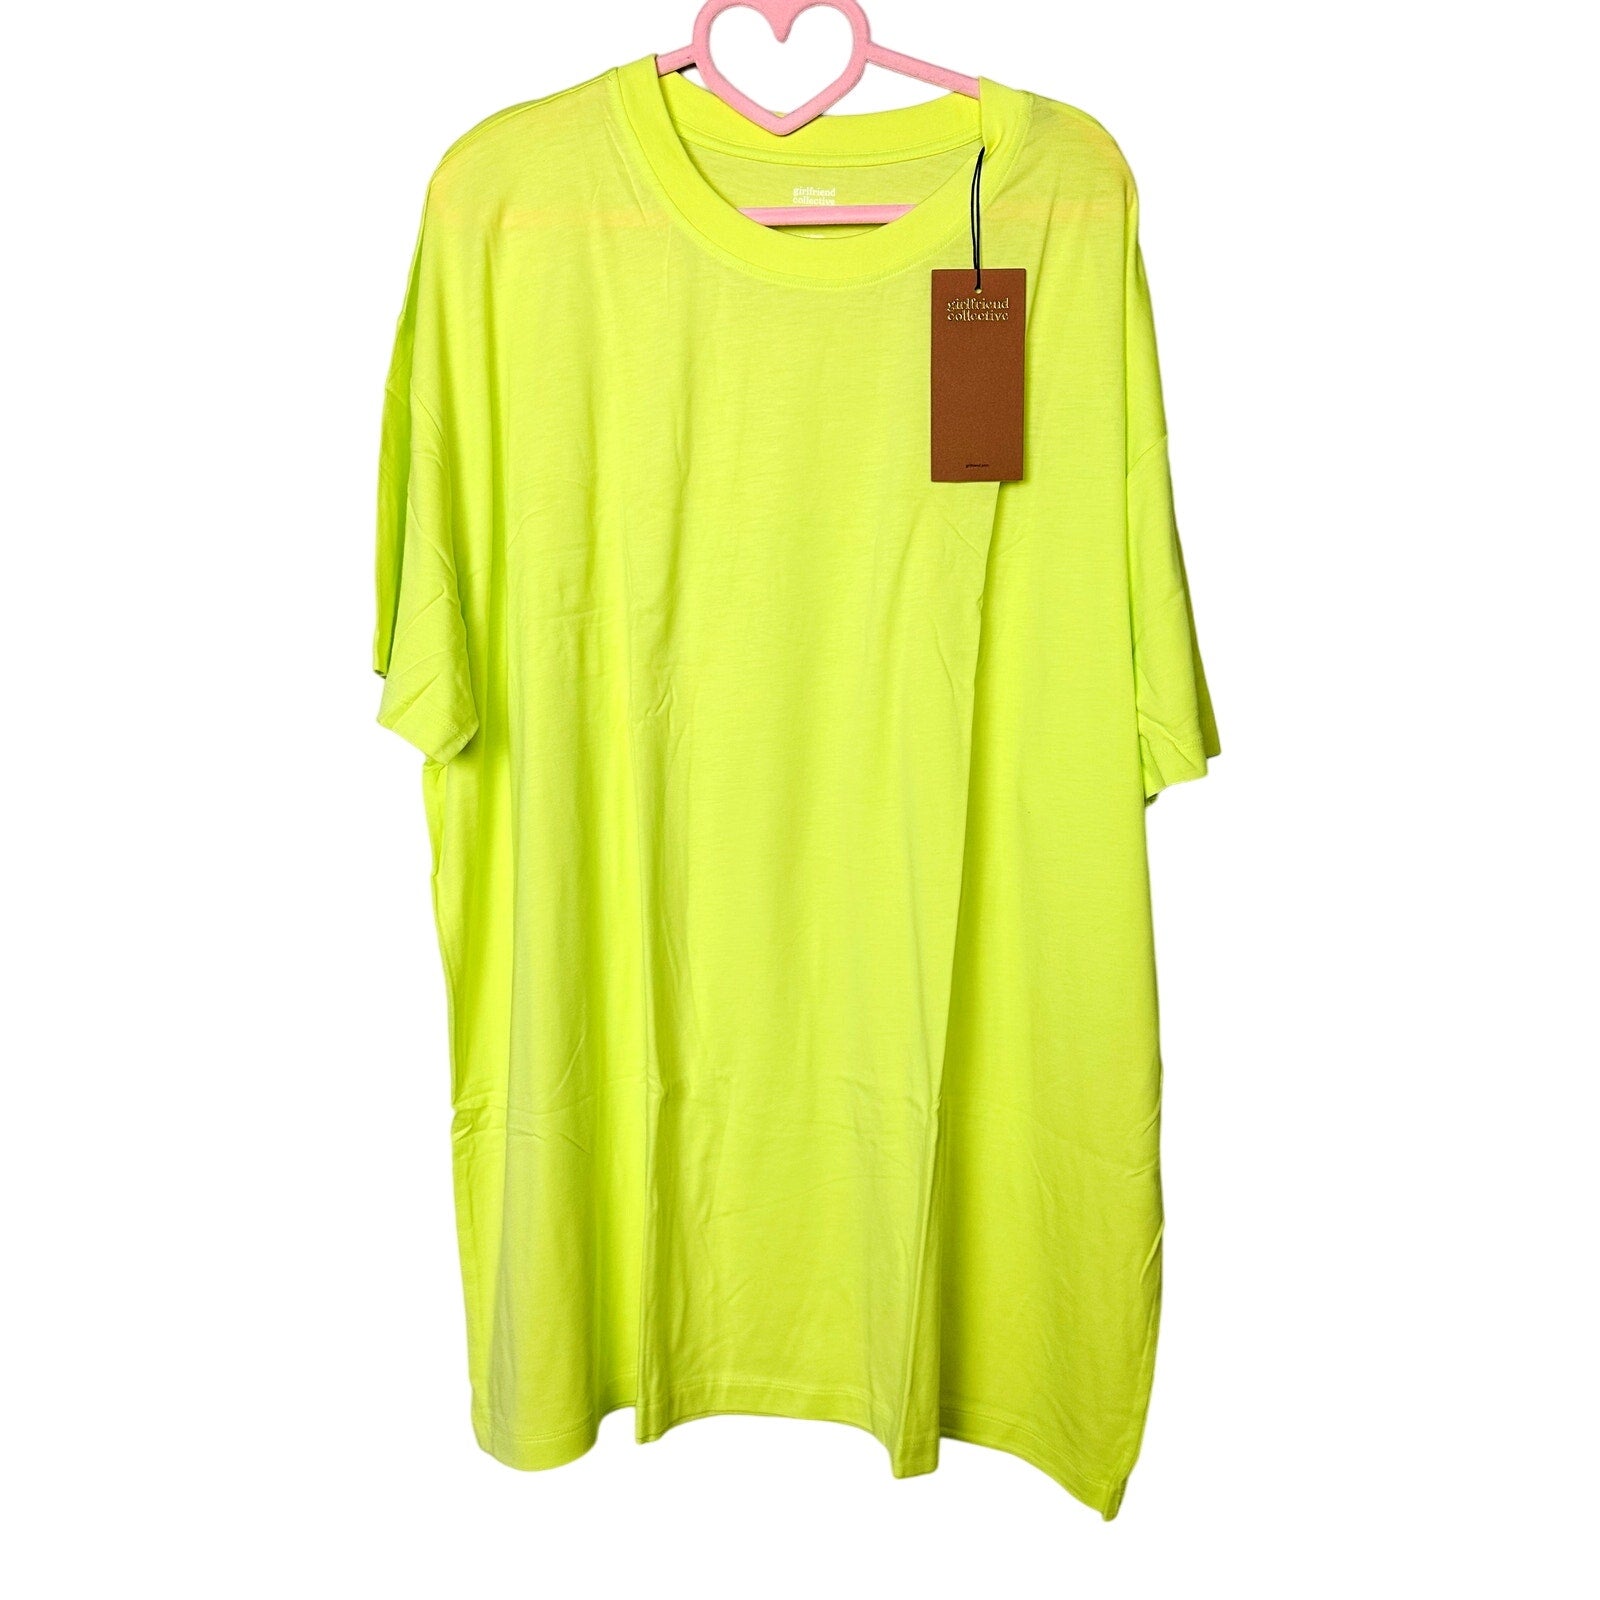 Girlfriend Collective NWT Unisex Crewneck T-Shirt Top lime Green Size 9